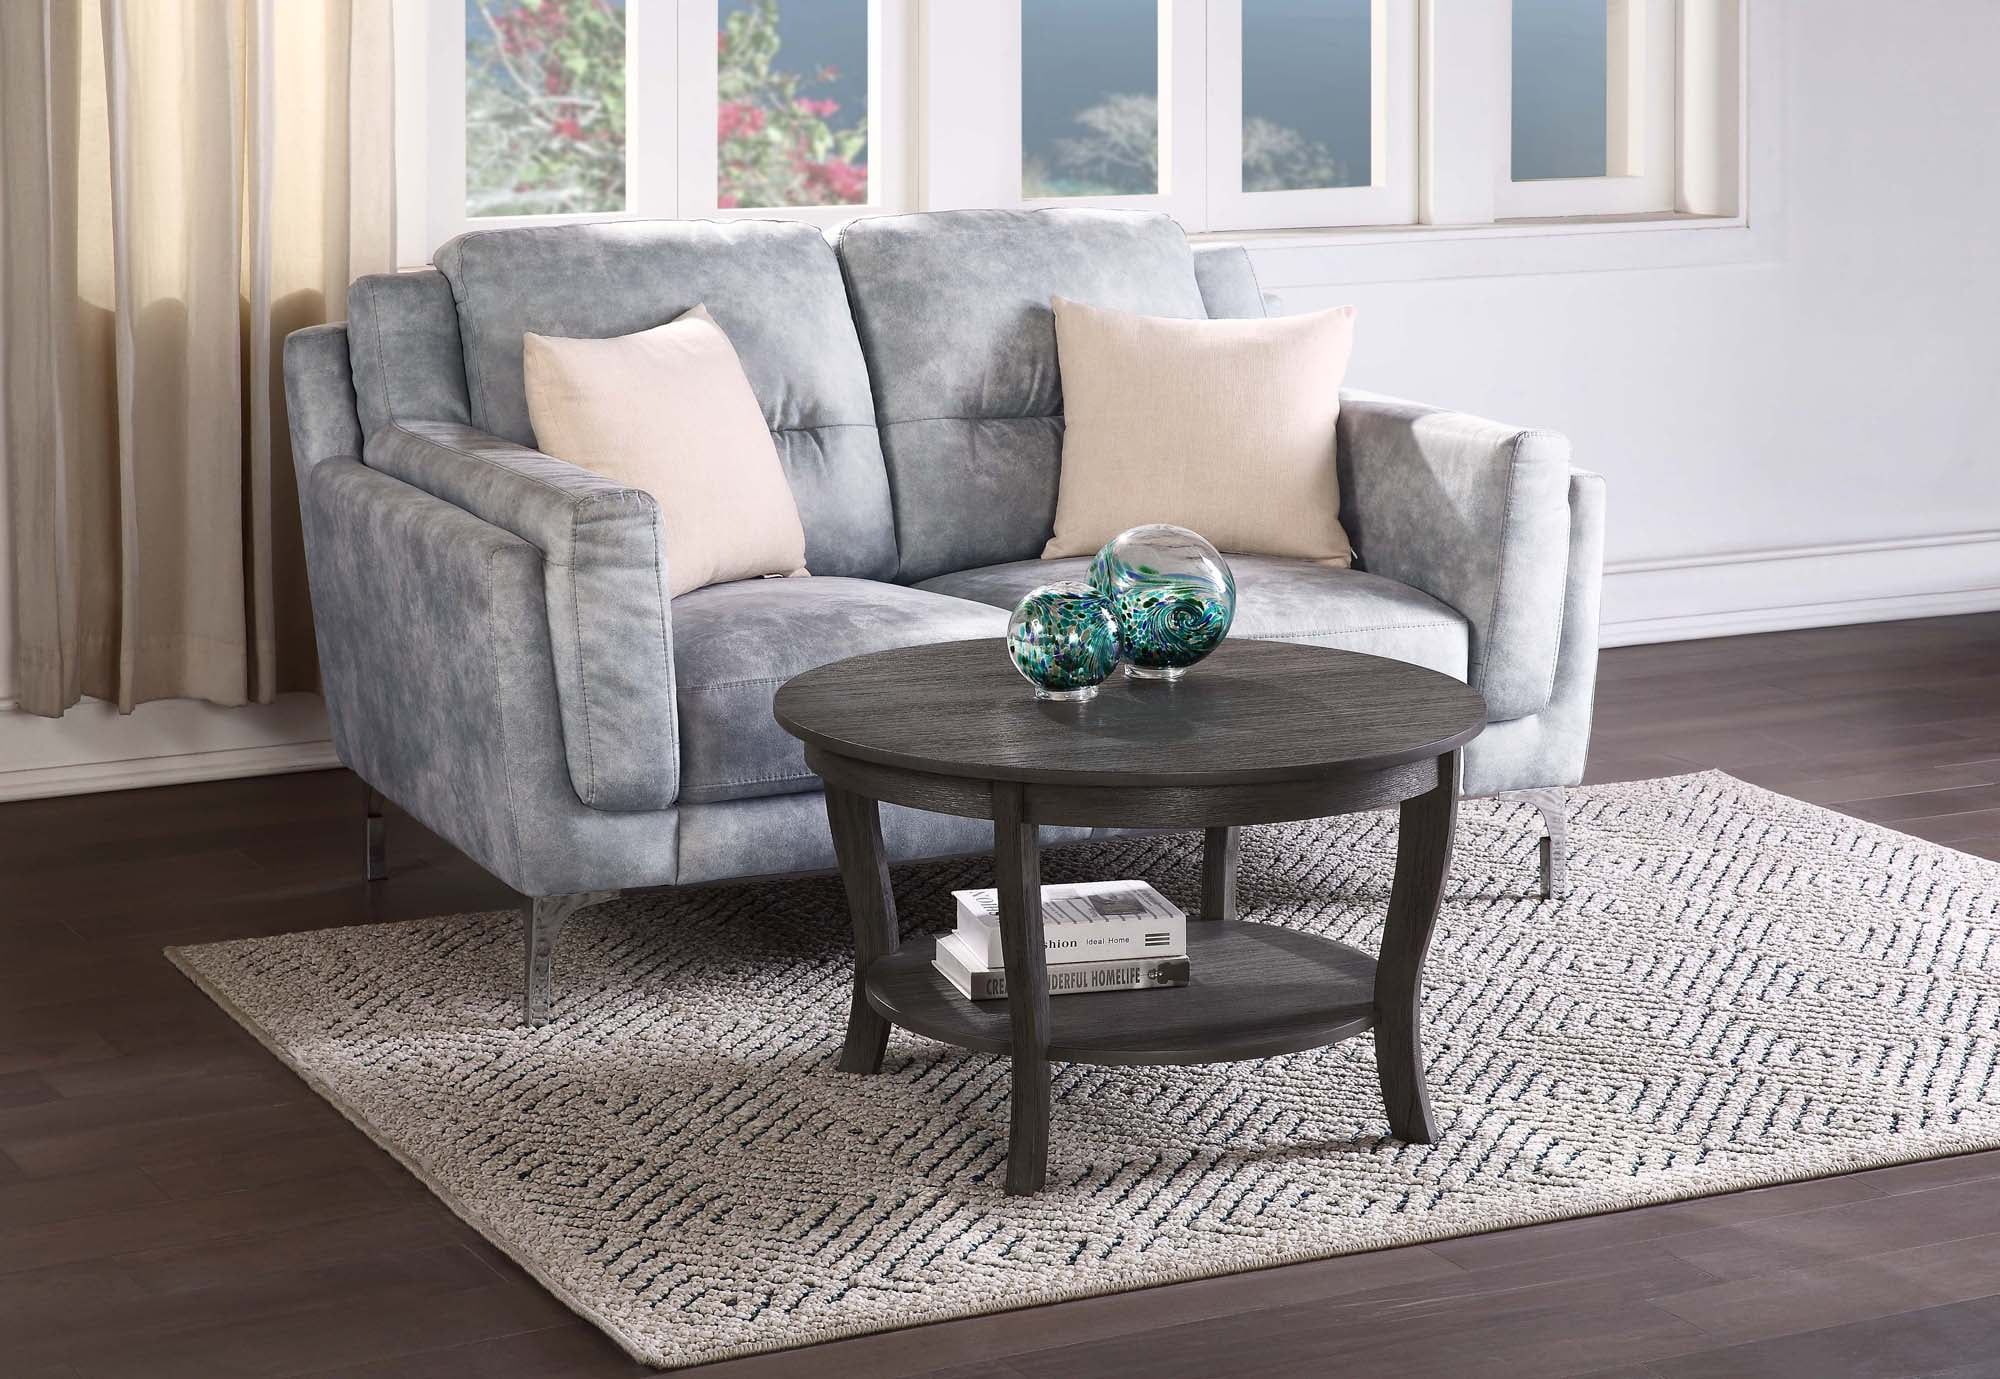 Convenience Concepts American Heritage Round Coffee Table With Shelf,  Wirebrush Dark Gray – Walmart Inside American Heritage Round Coffee Tables (View 9 of 15)